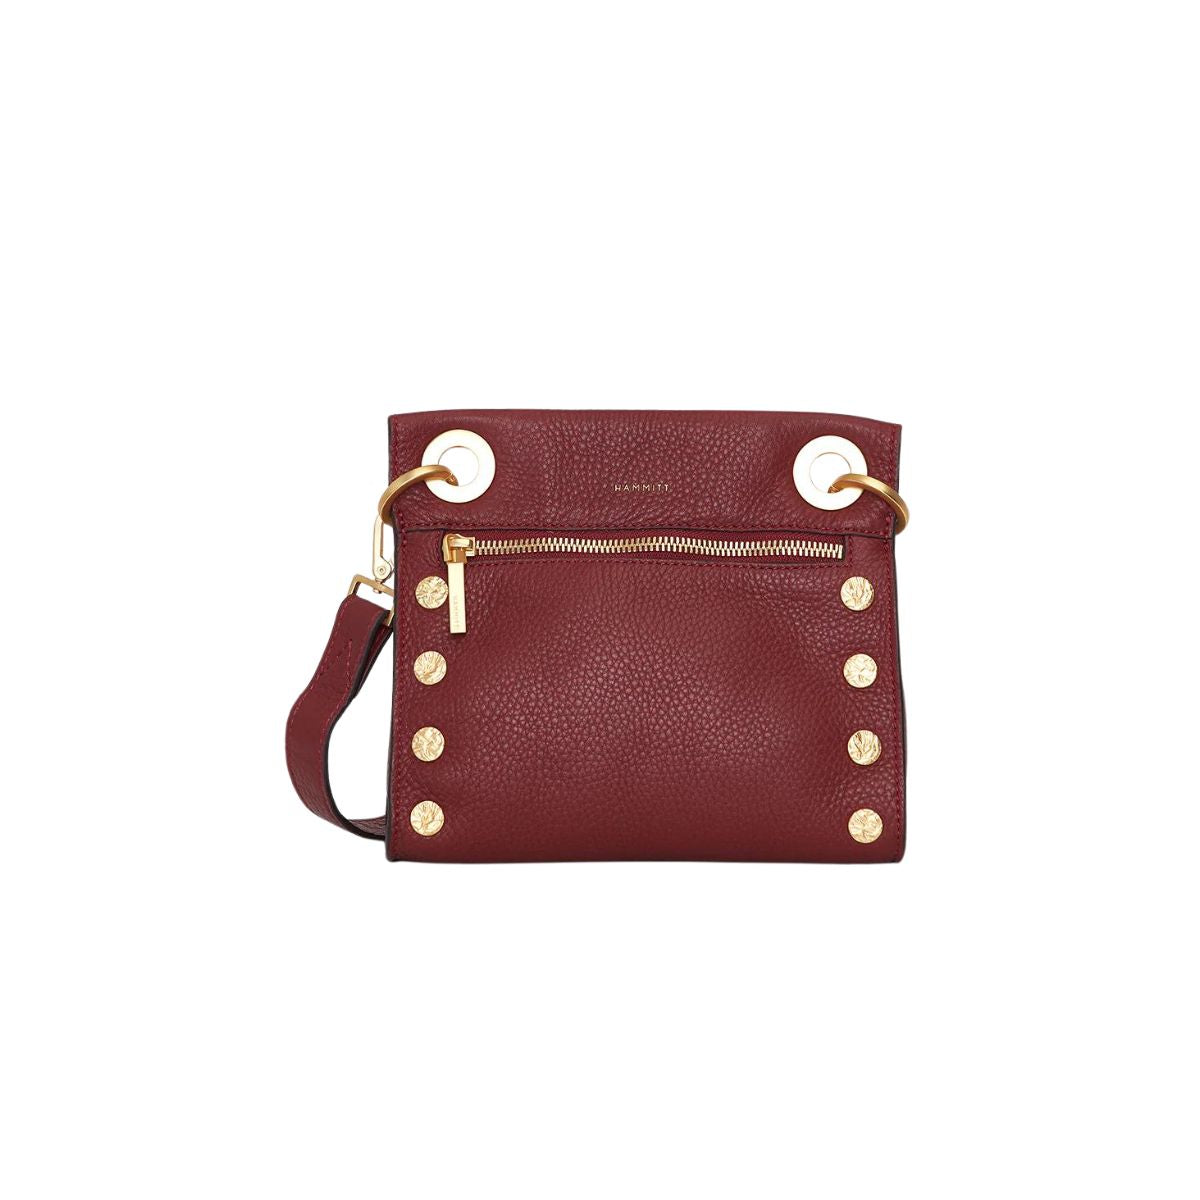 Hammitt Tony Small Crossbody Bag in Pomodoro Red with Hammered Brushed Gold